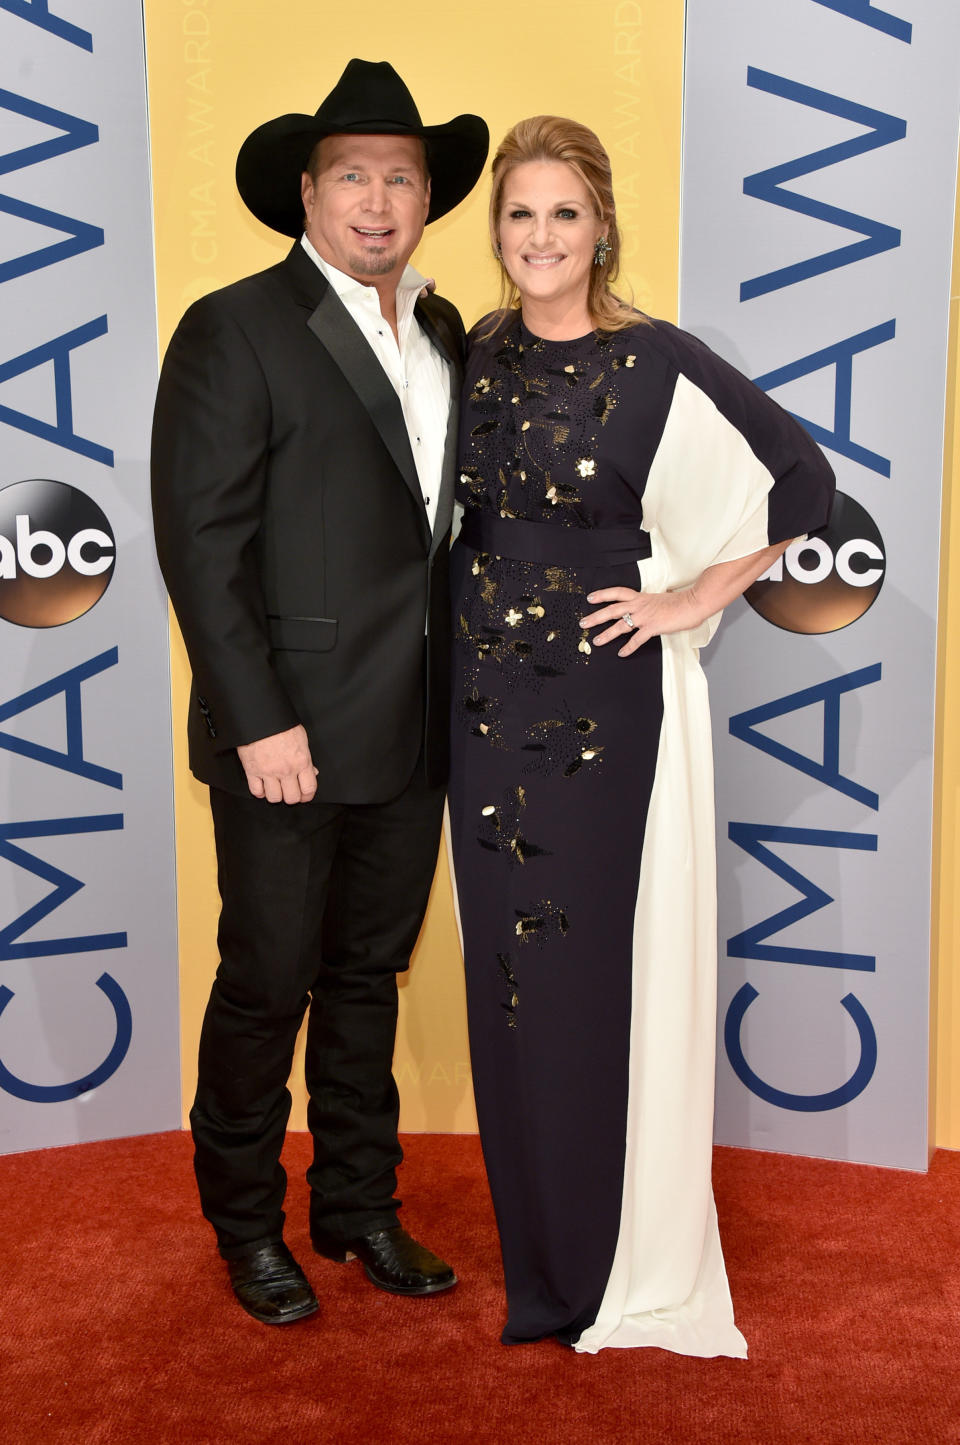 NASHVILLE, TN - NOVEMBER 02:  Singers Garth Brooks and Trisha Yearwood attend the 50th annual CMA Awards at the Bridgestone Arena on November 2, 2016 in Nashville, Tennessee.  (Photo by John Shearer/WireImage)